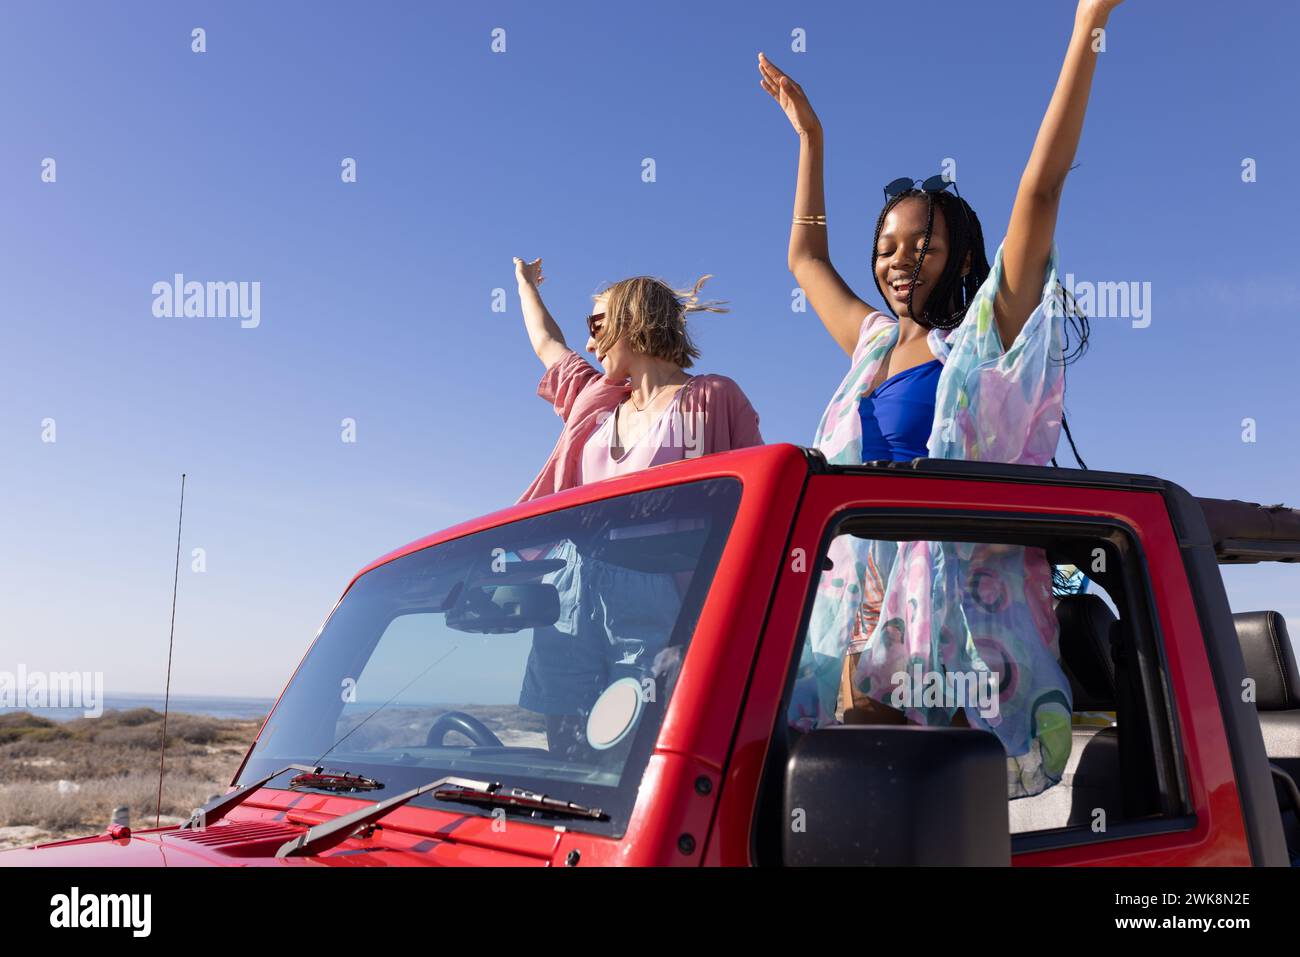 Two friends of different races celebrate freedom on a coastal road trip in a convertible. Stock Photo